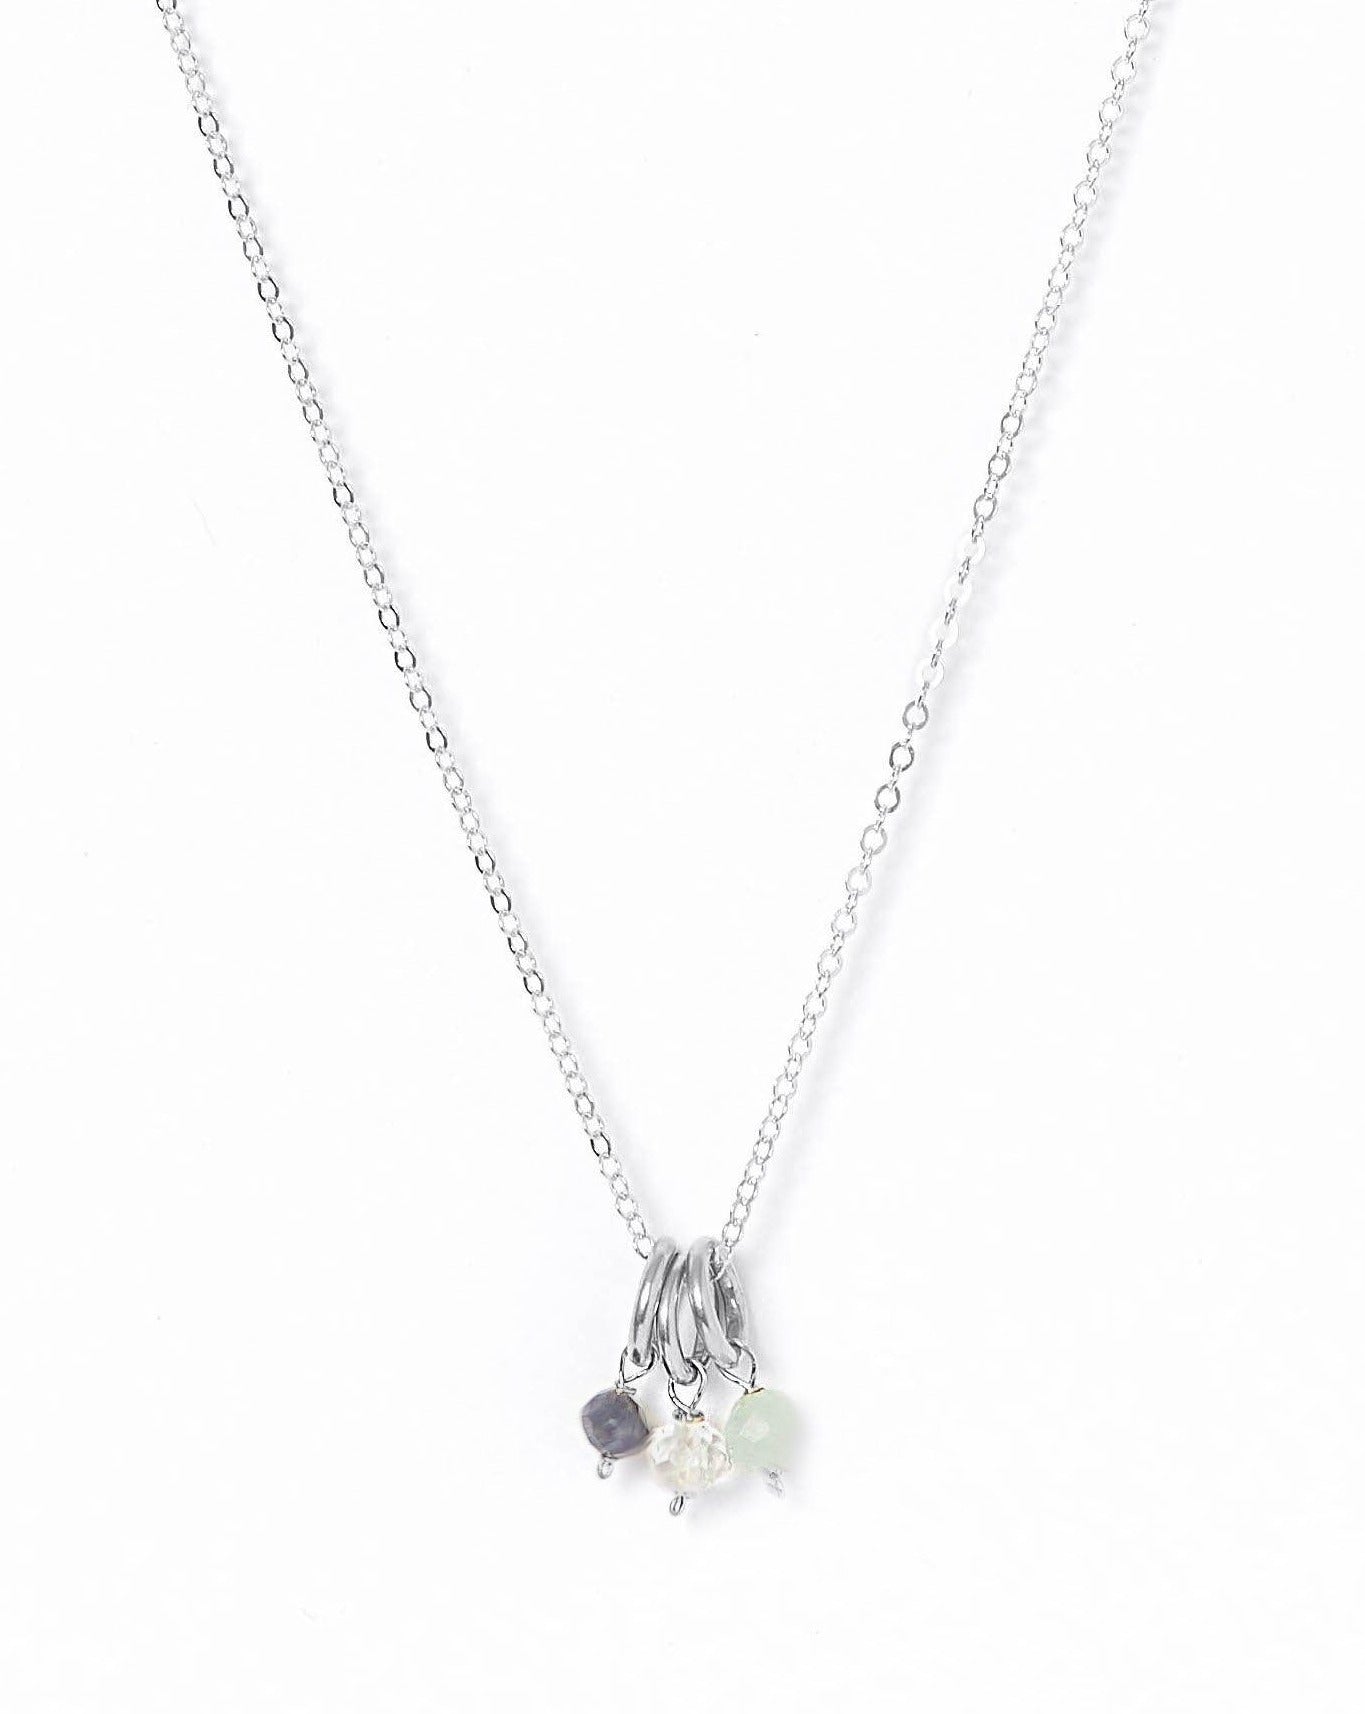 One Love Birthstone Necklace by KOZAKH. A necklace crafted in Sterling Silver, featuring customizable Birthstone charms and is available in 4 adjustable lengths.